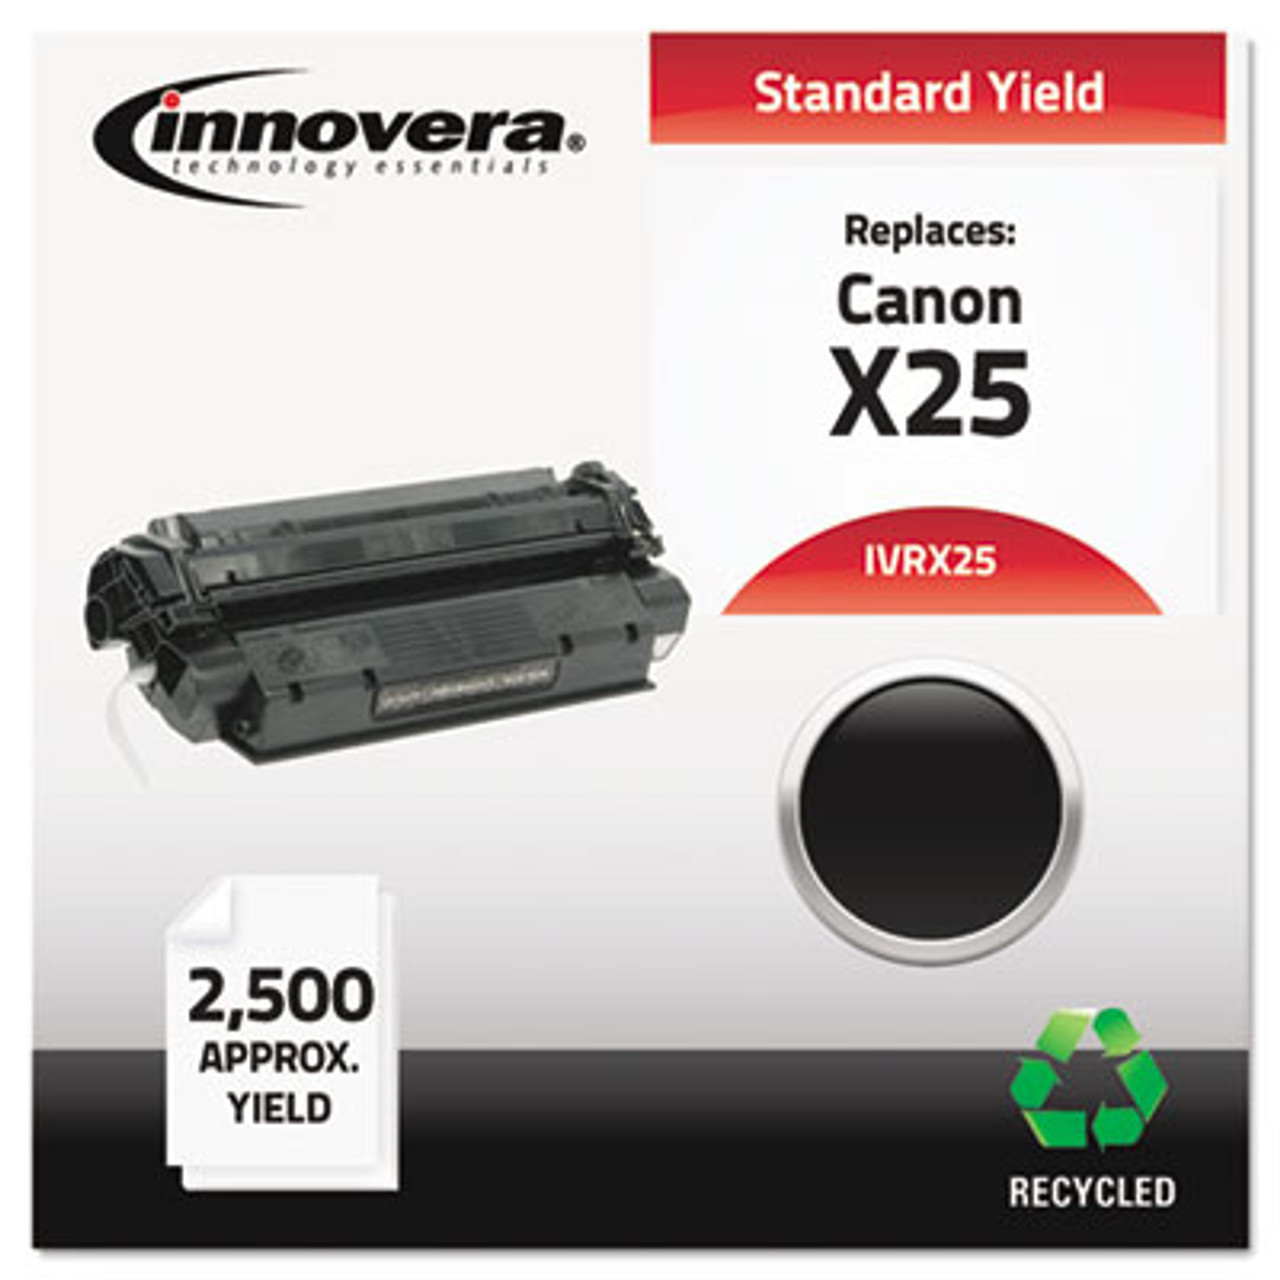 Remanufactured 8489A001AA (X25) Toner, 2500 Yield, Black